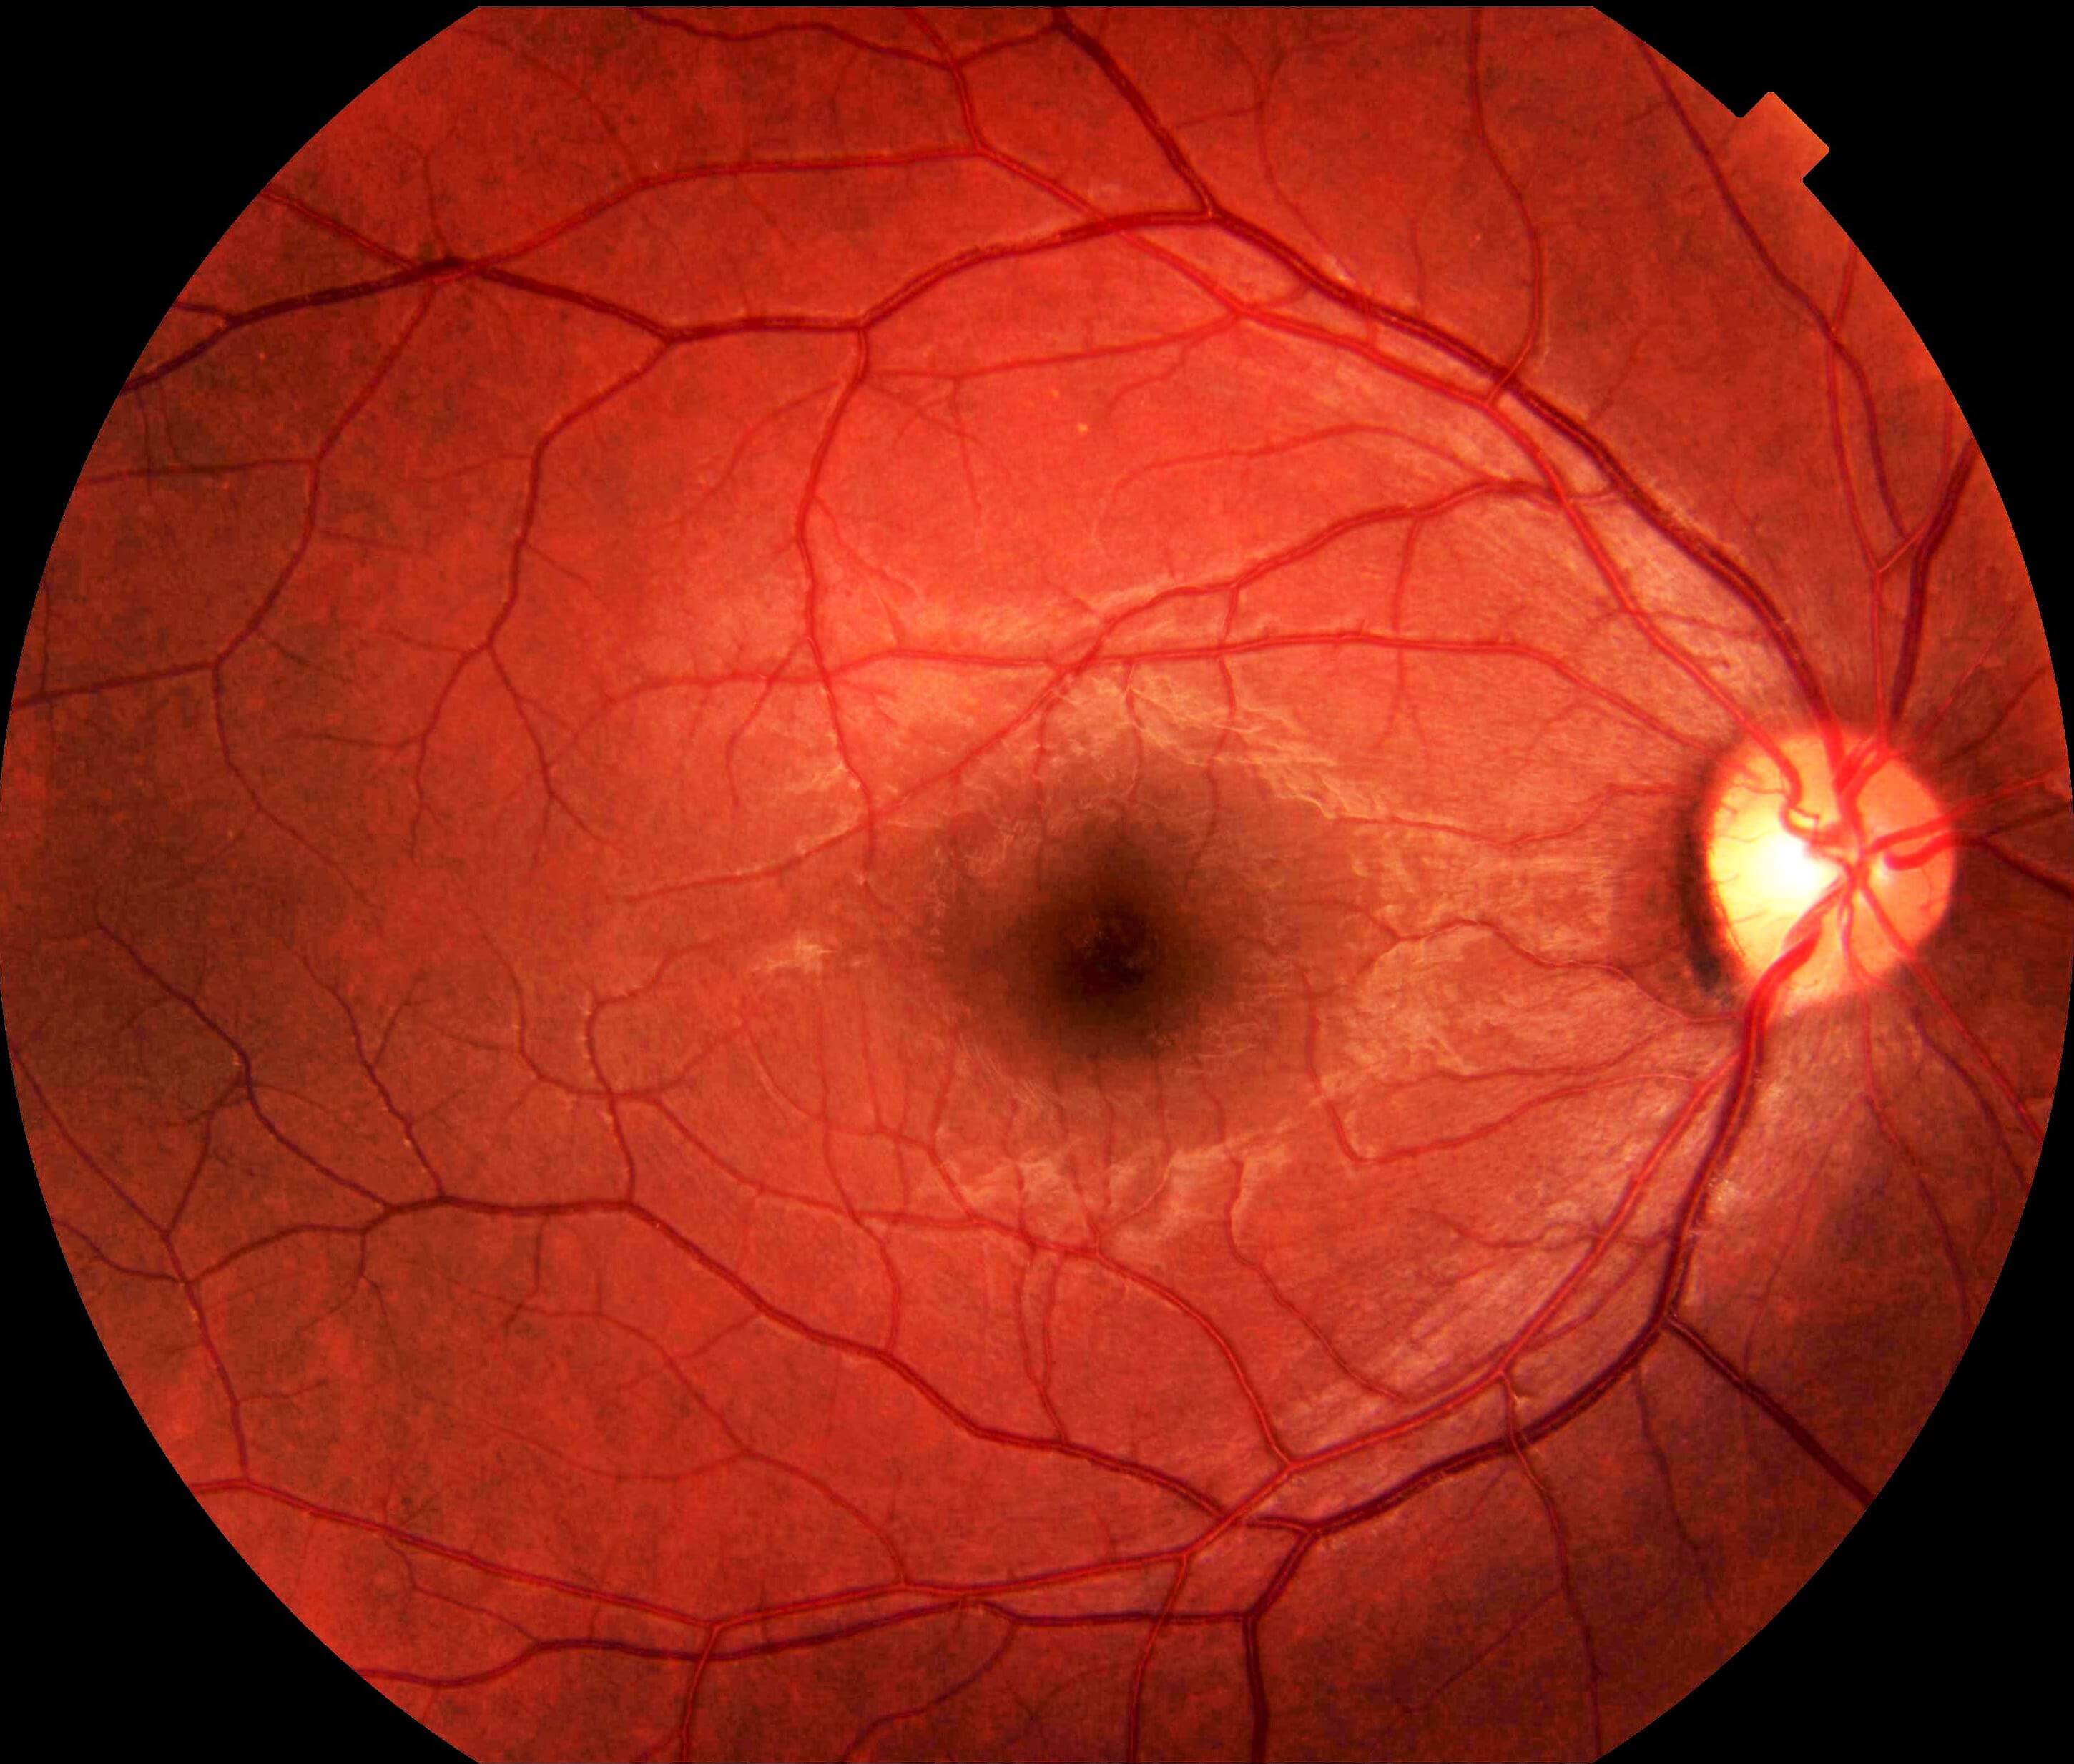 Right fundus autofluorescence imaging demonstrating hypoautofluorecence in the location of the haemorrhage, due to blocking of normal retinal pigment epithelial hyperautofluorescence.